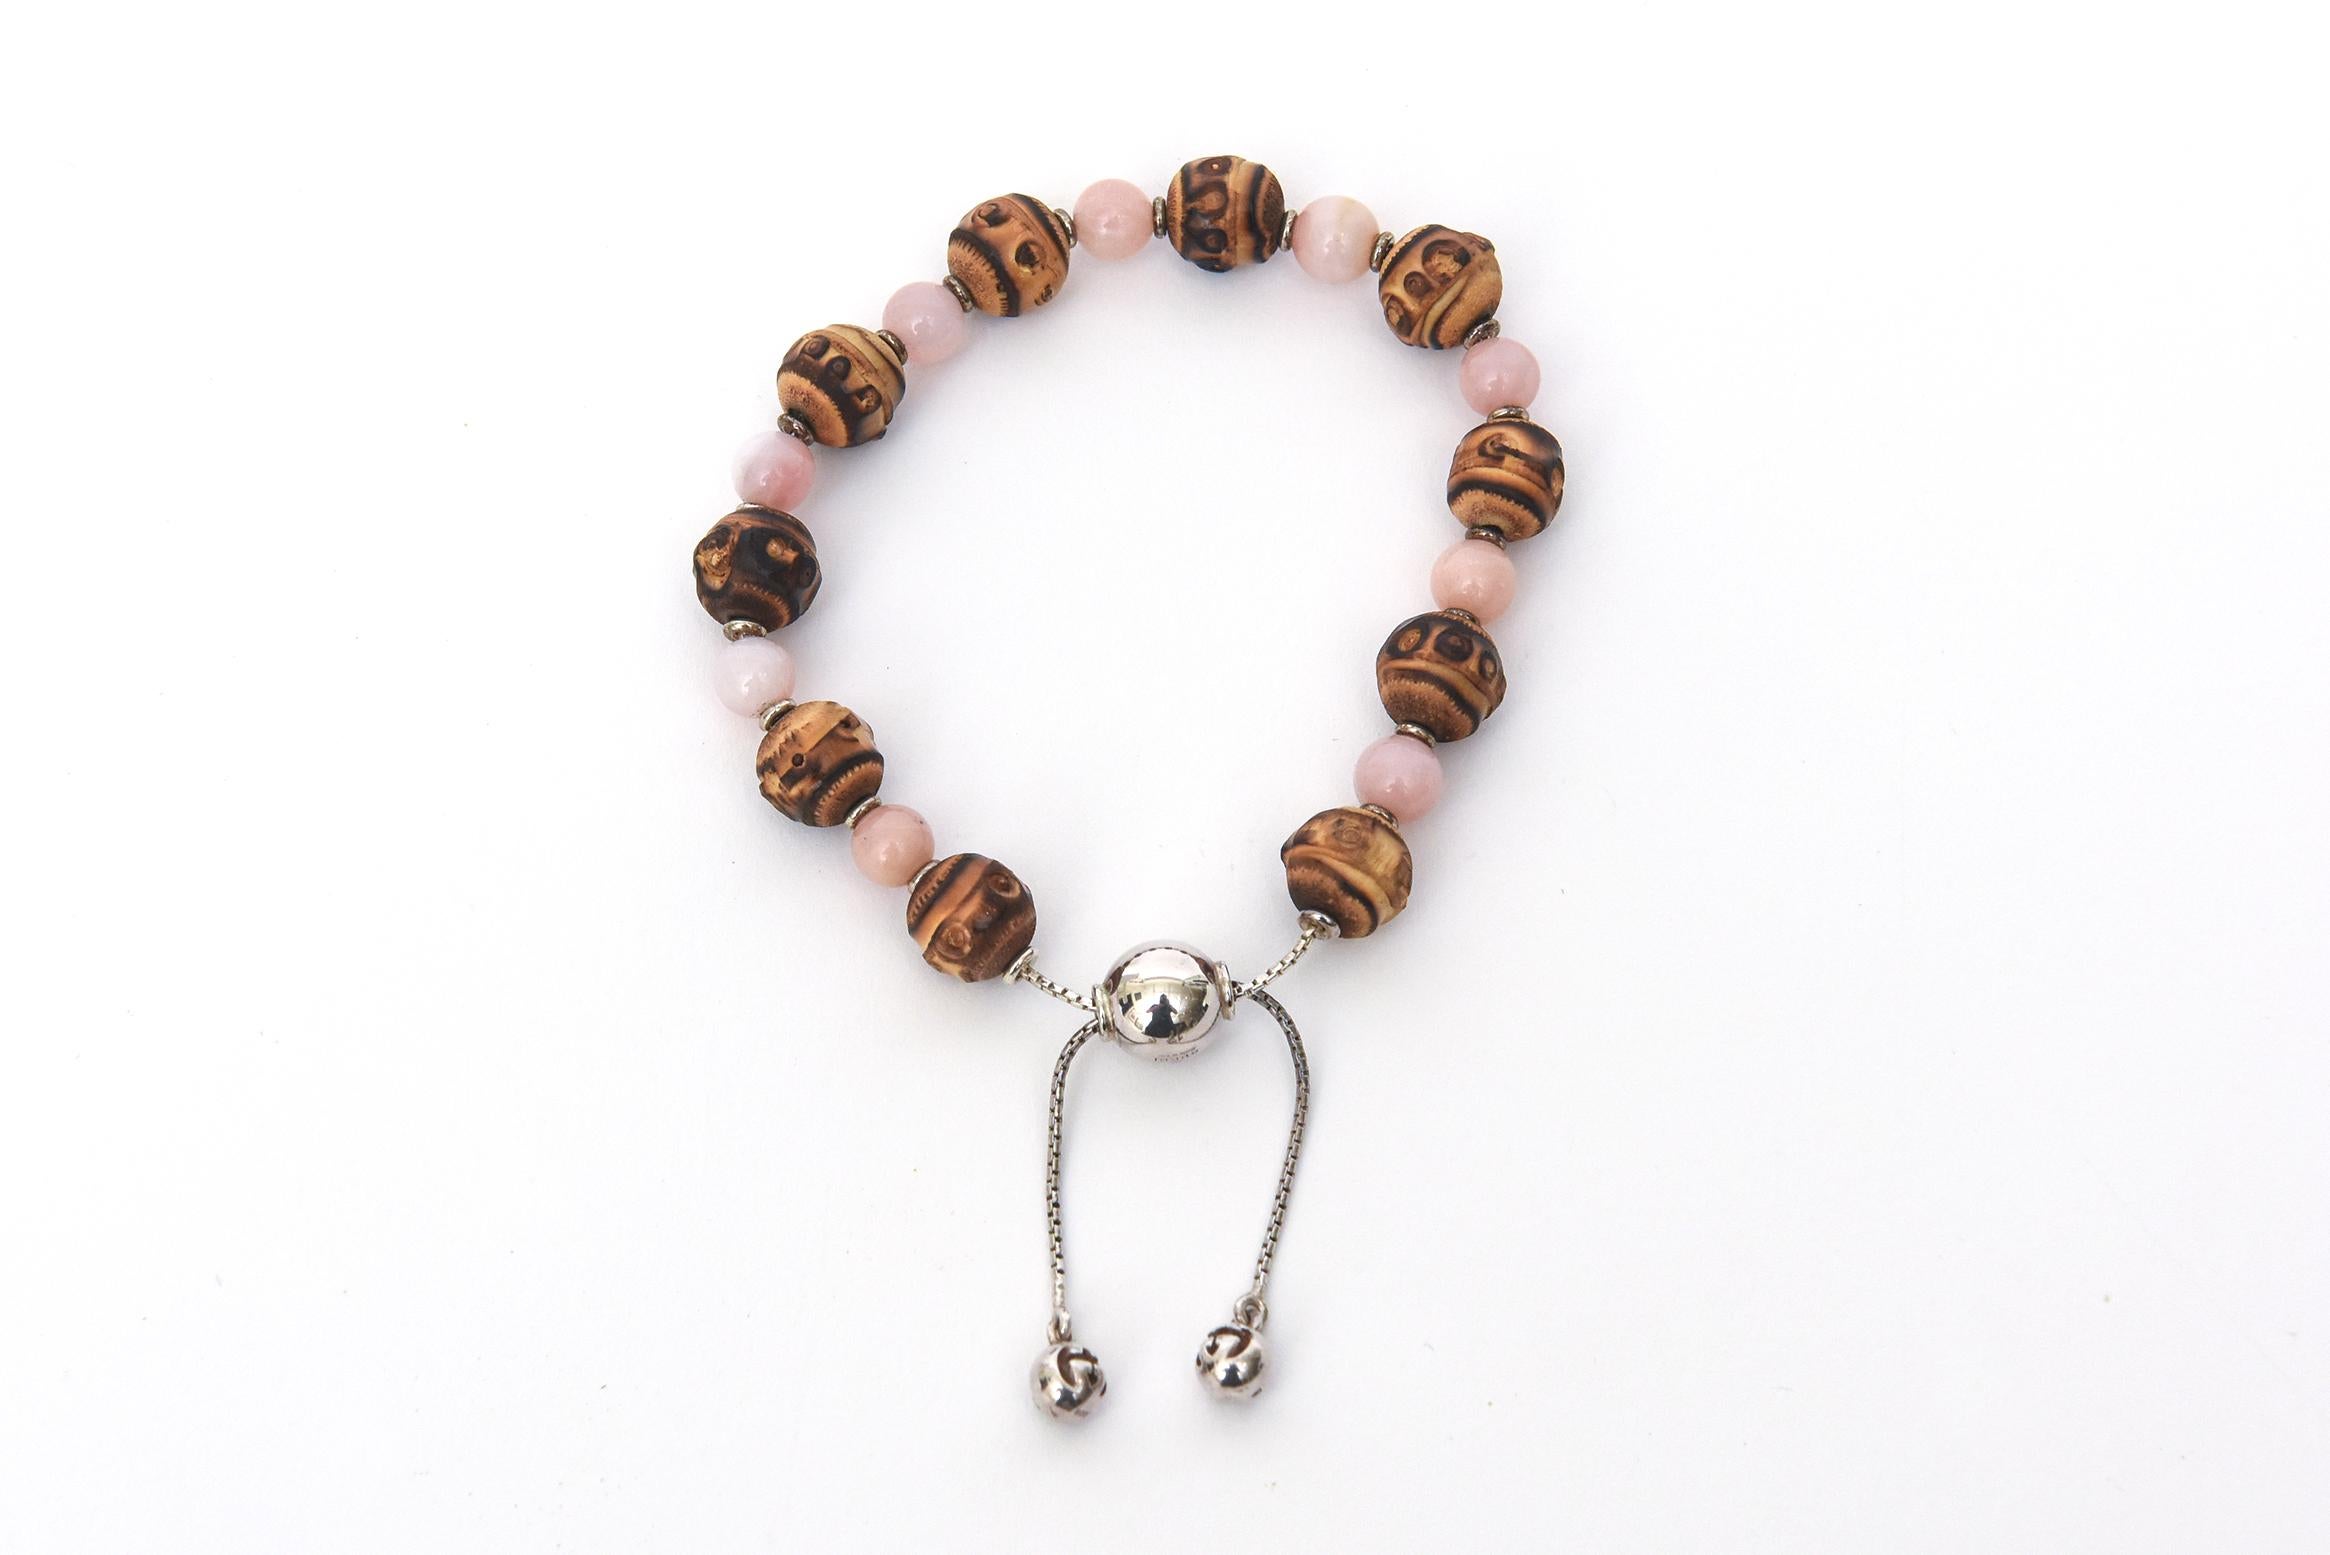 This vintage Italian Gucci small bracelet is part sterling silver and the beads are a combination of a pink gemstone that looks like rose quartz infused with a bamboo like stone bead. it is narrow and should be coupled with other bracelets of Gucci